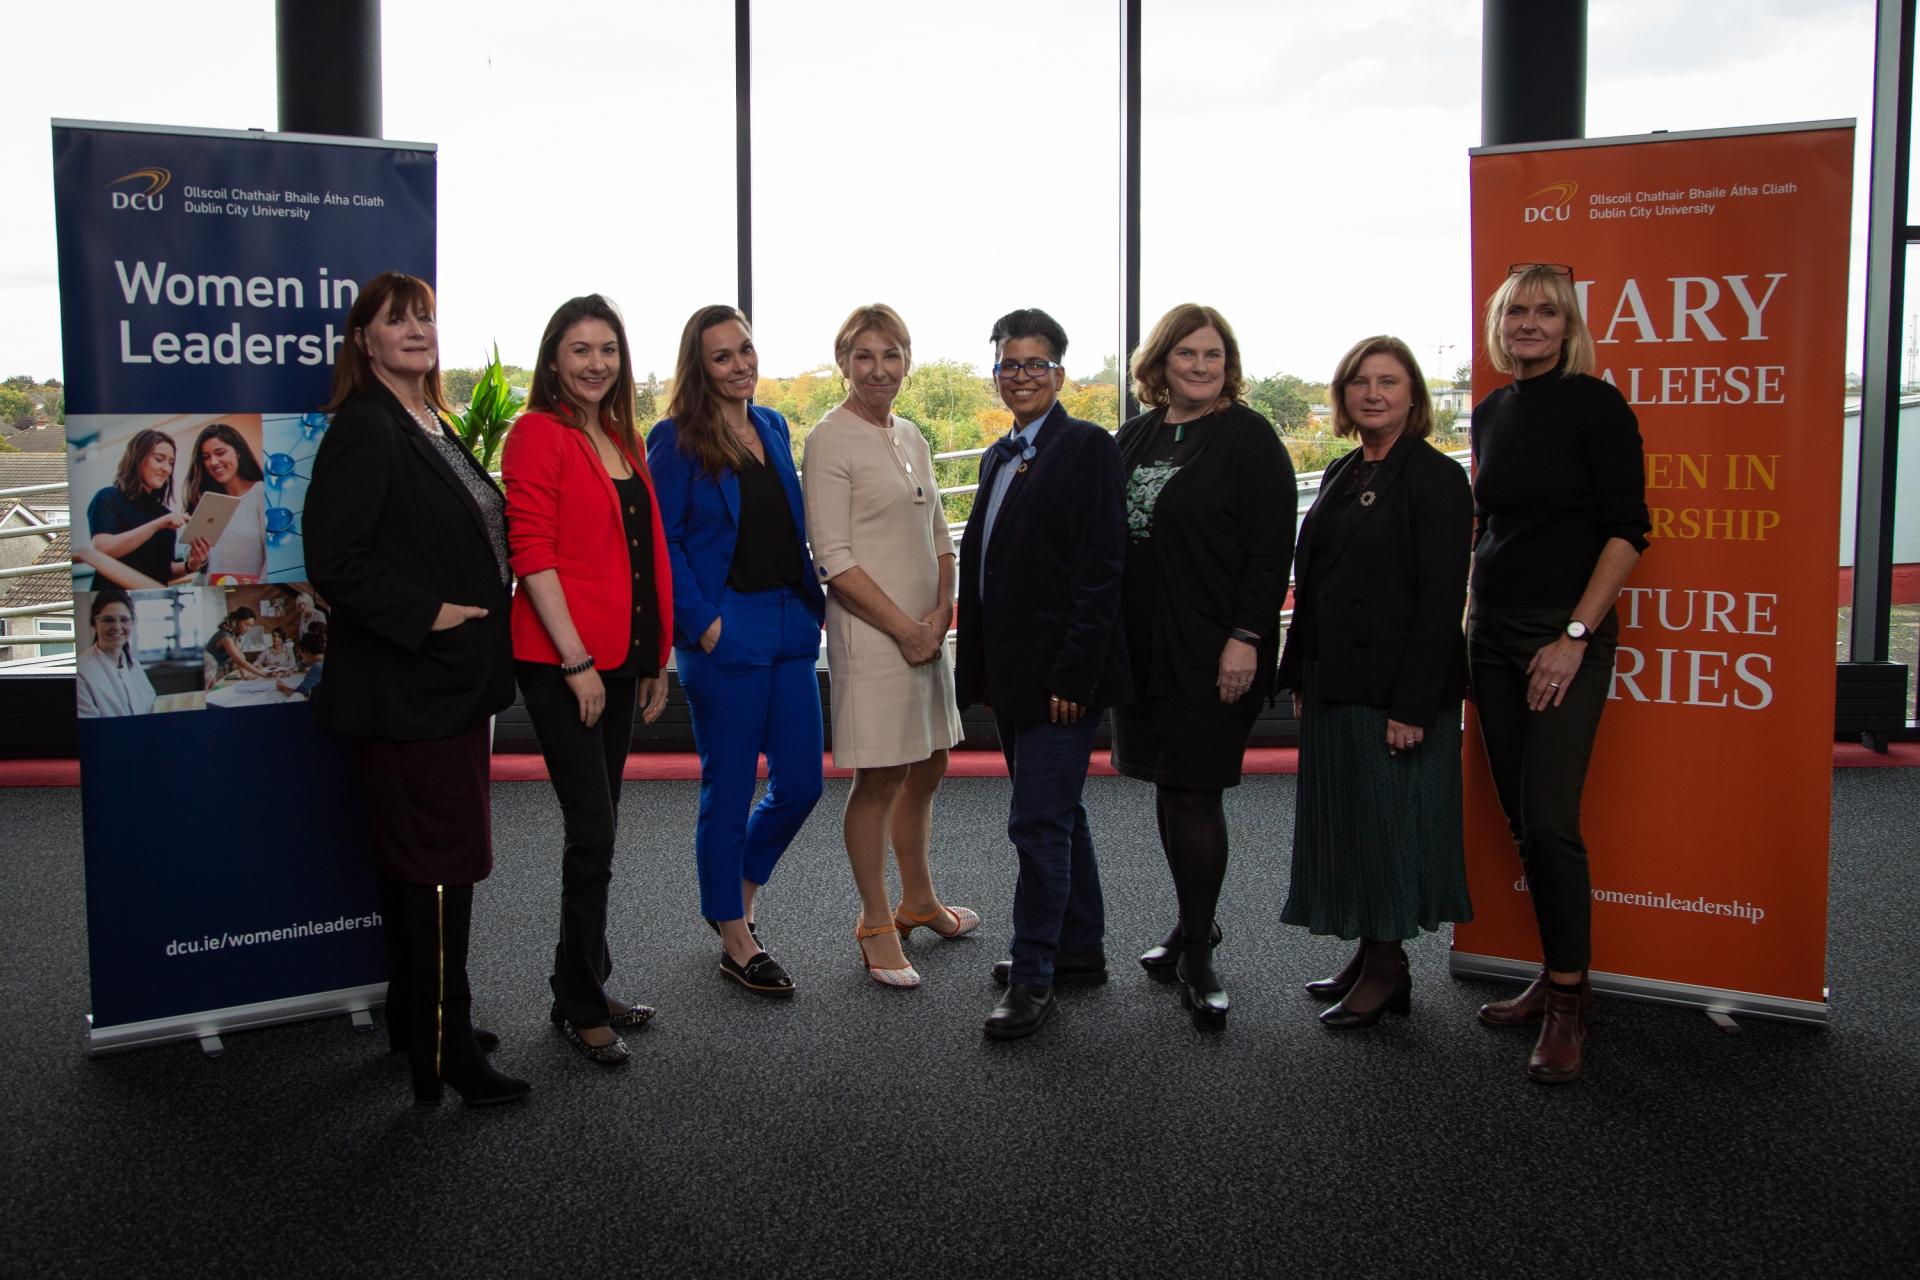 DCU Women In Leadership Event: Leadership is 'loneliness' but 'worth it', says RTE broadcaster Aine Lawlor